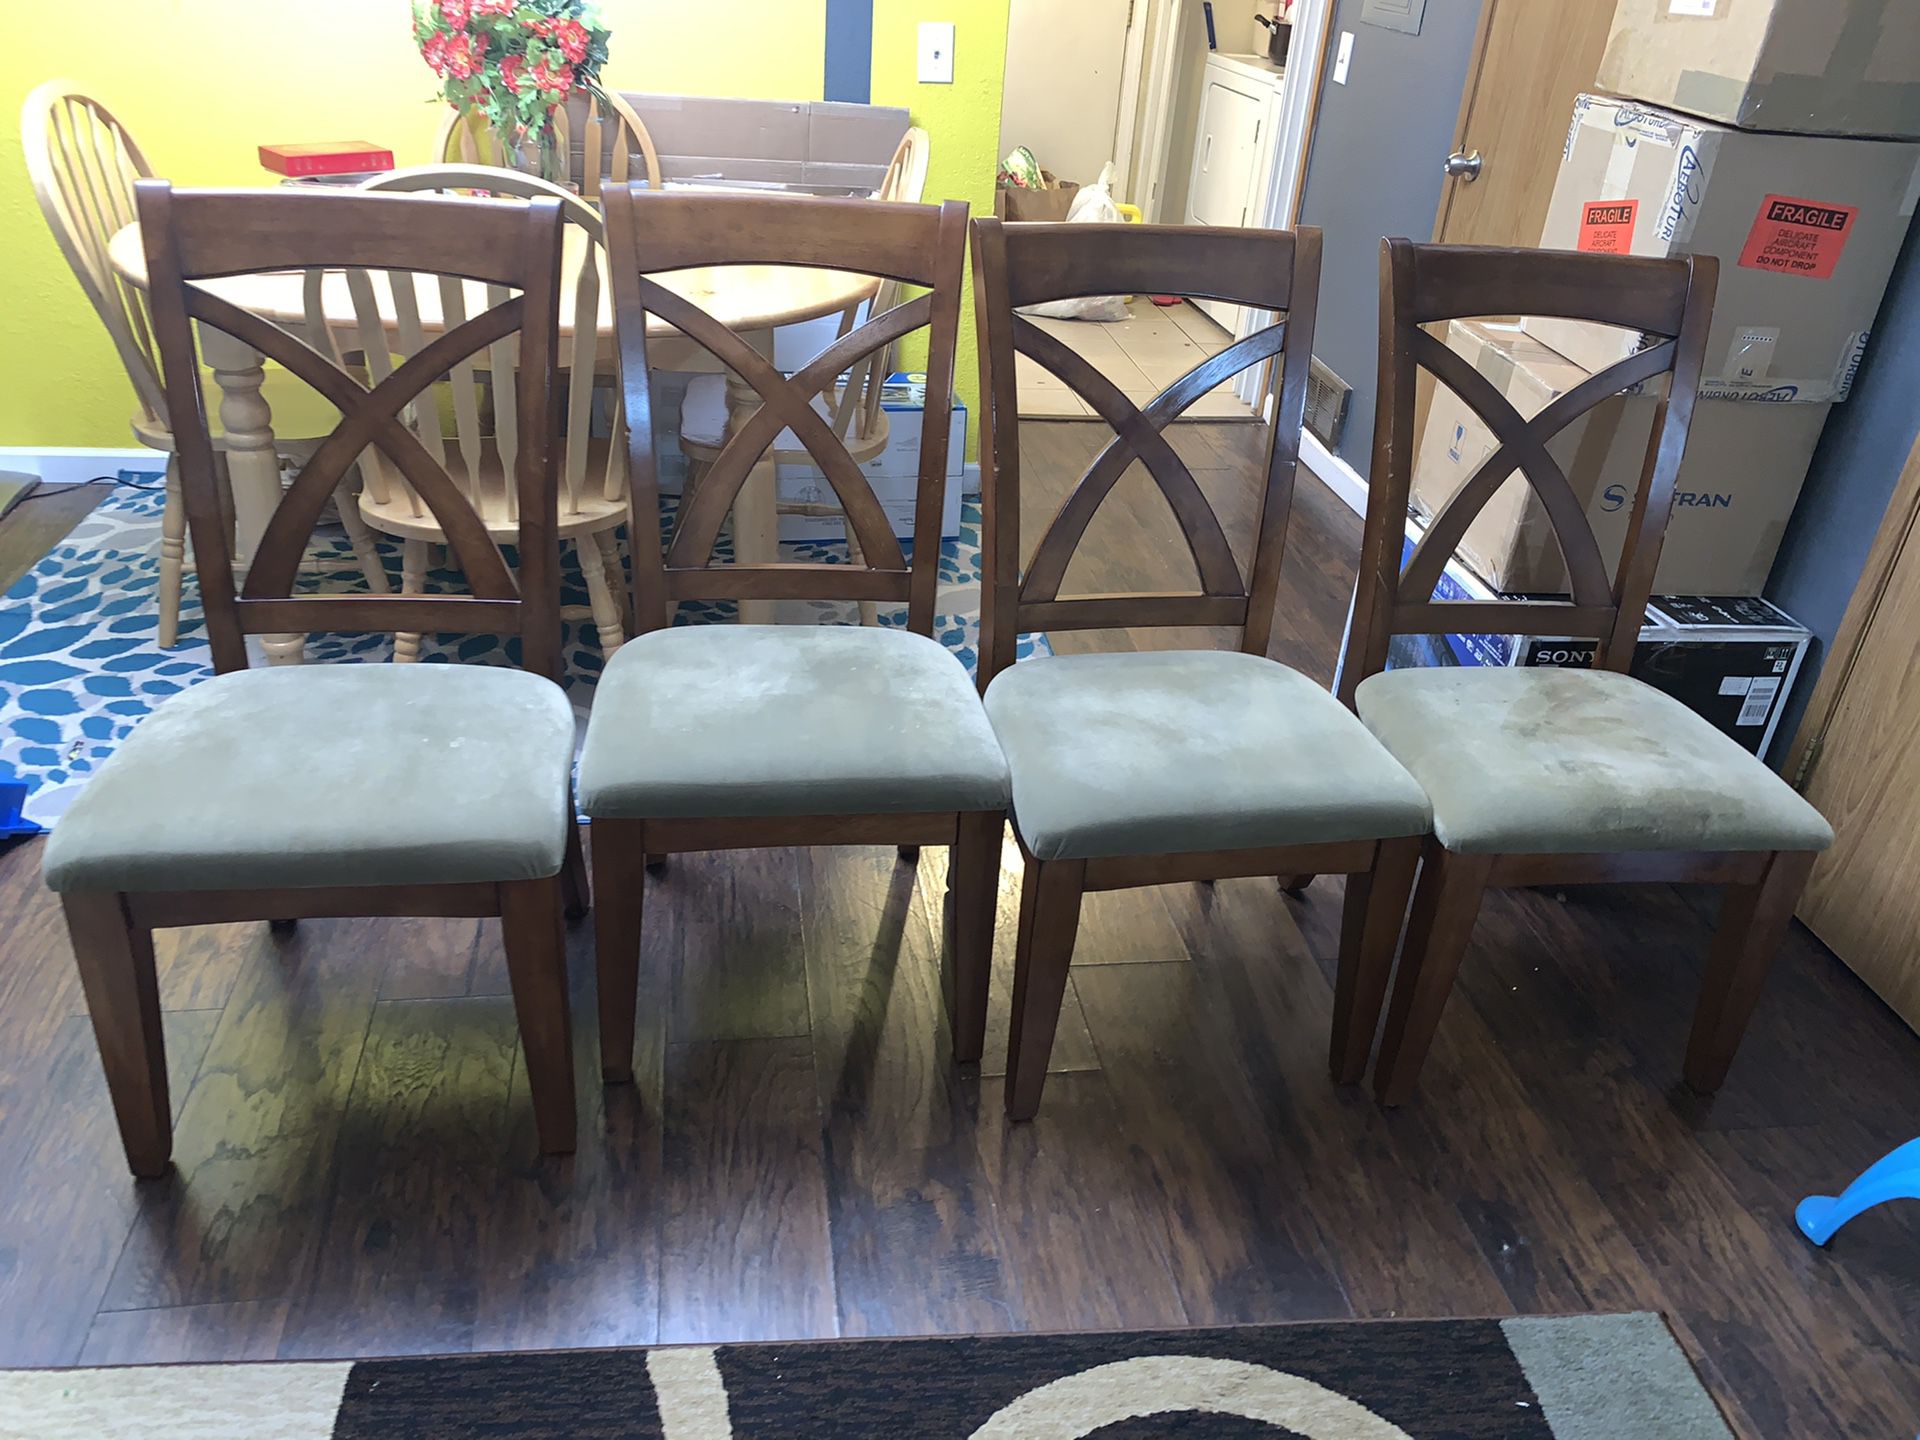 Wooden chairs with cushion